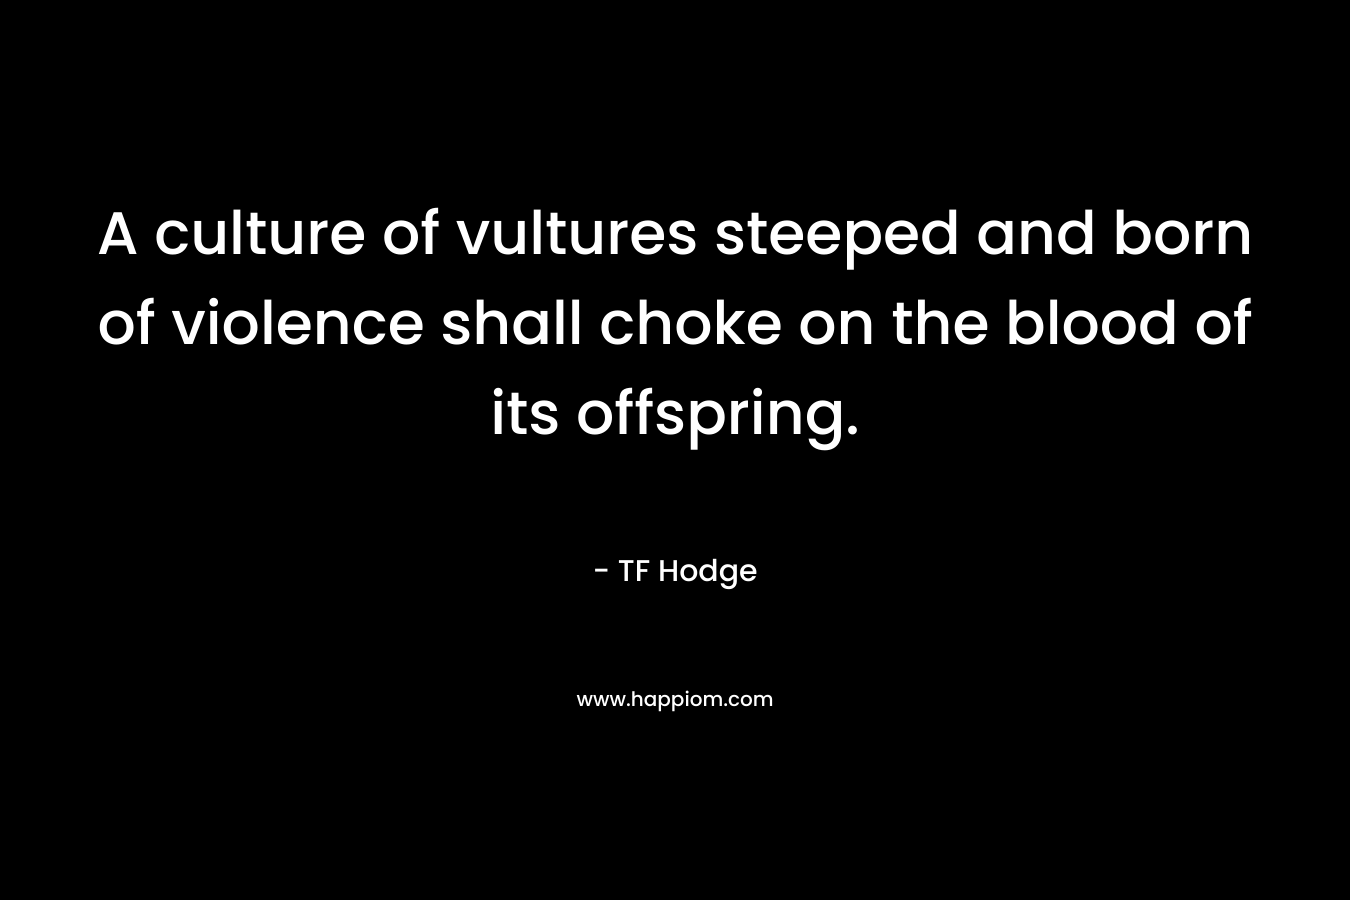 A culture of vultures steeped and born of violence shall choke on the blood of its offspring. – TF Hodge